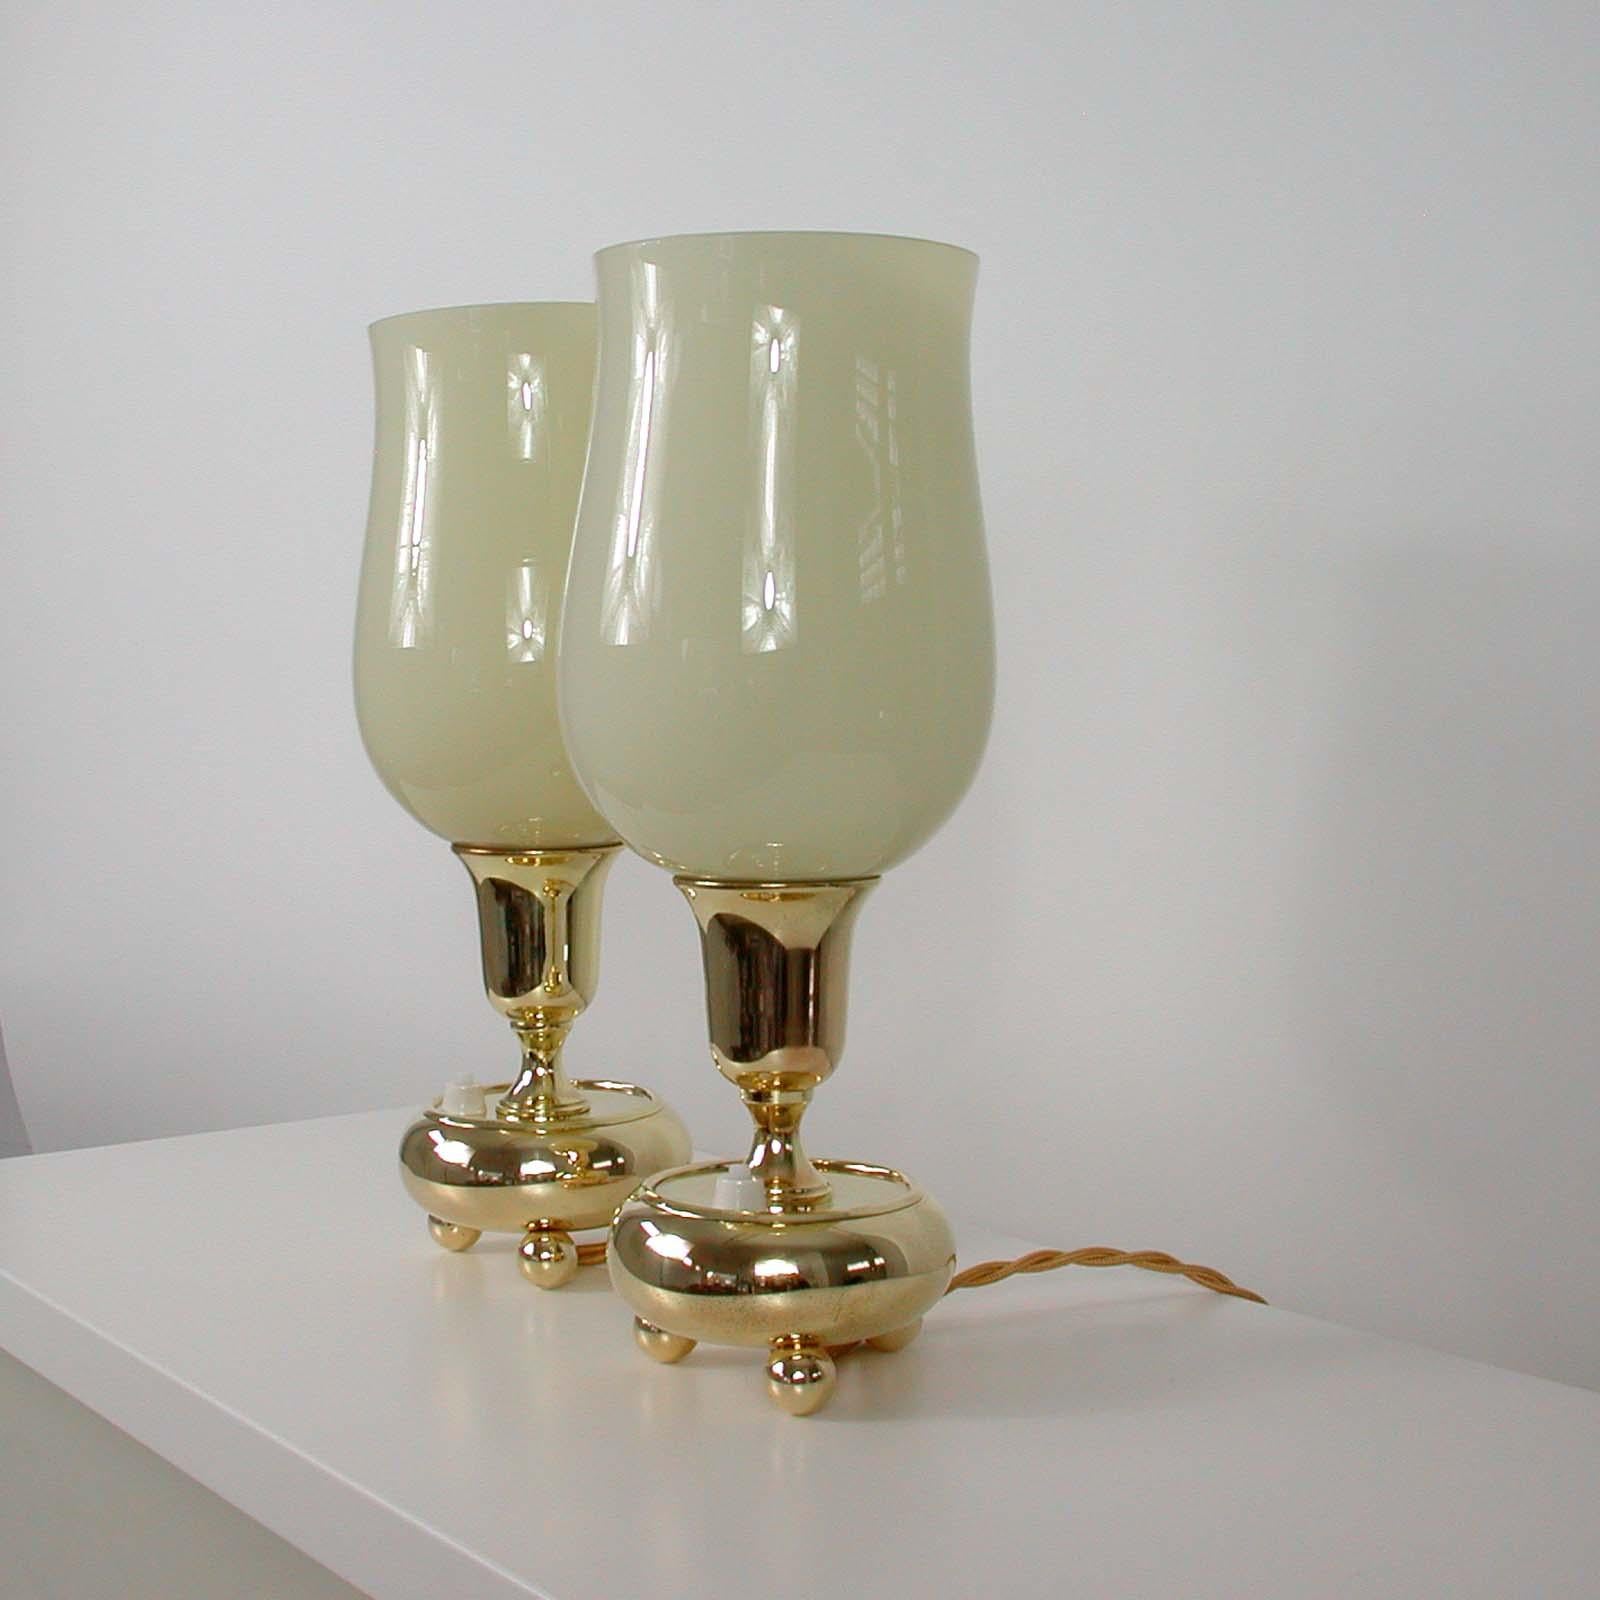 Mid-20th Century German Bauhaus Brass and Opal Torchiere Table Lamps, Set of 2, 1930s For Sale